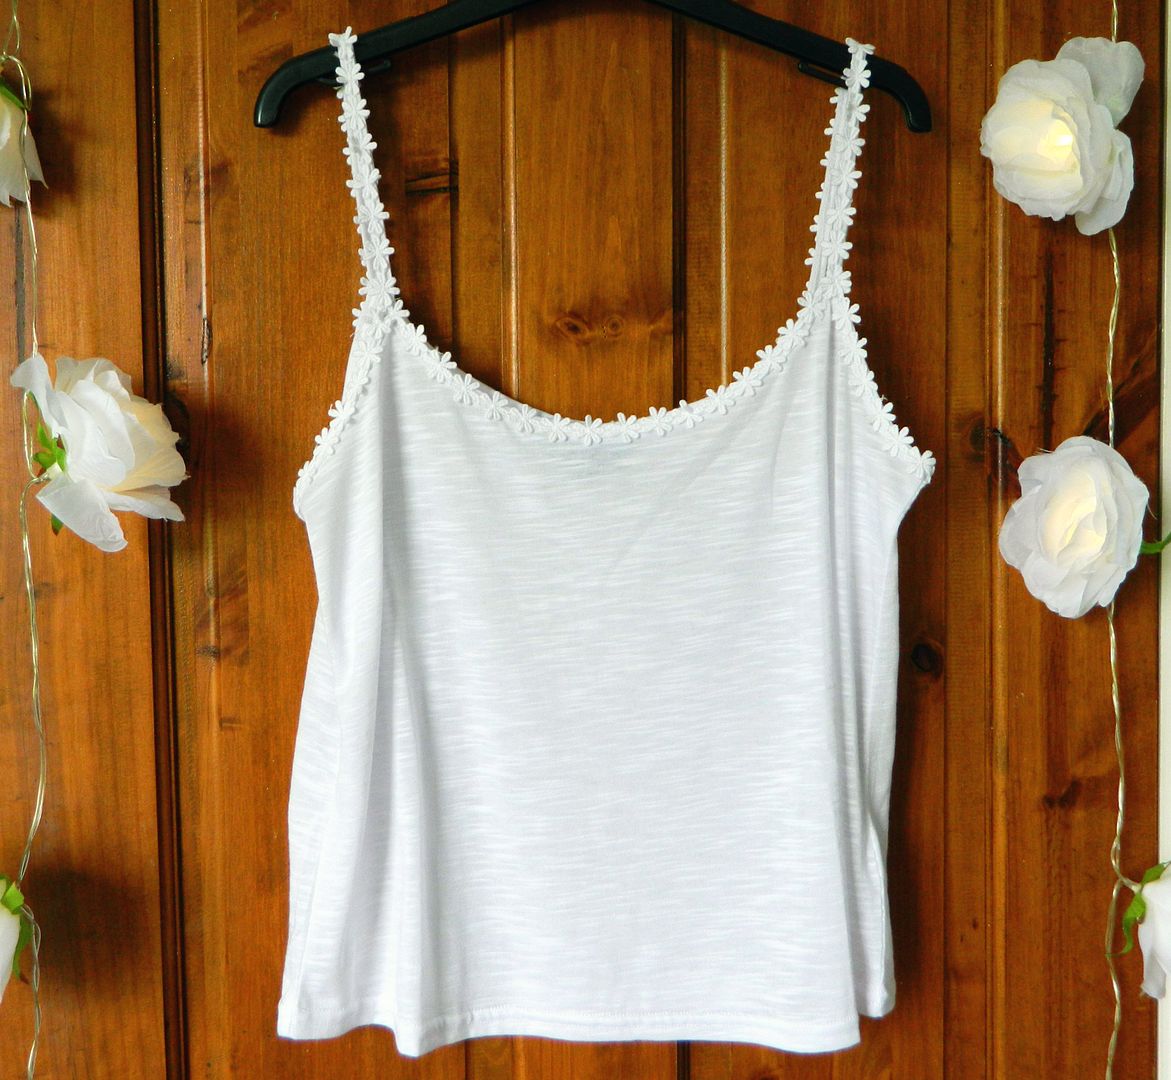 Spring Summer Fashion Accessories Haul 2014 New Look Daisy Detail White Cami Belle-amie UK Beauty Fashion Lifestyle Blog